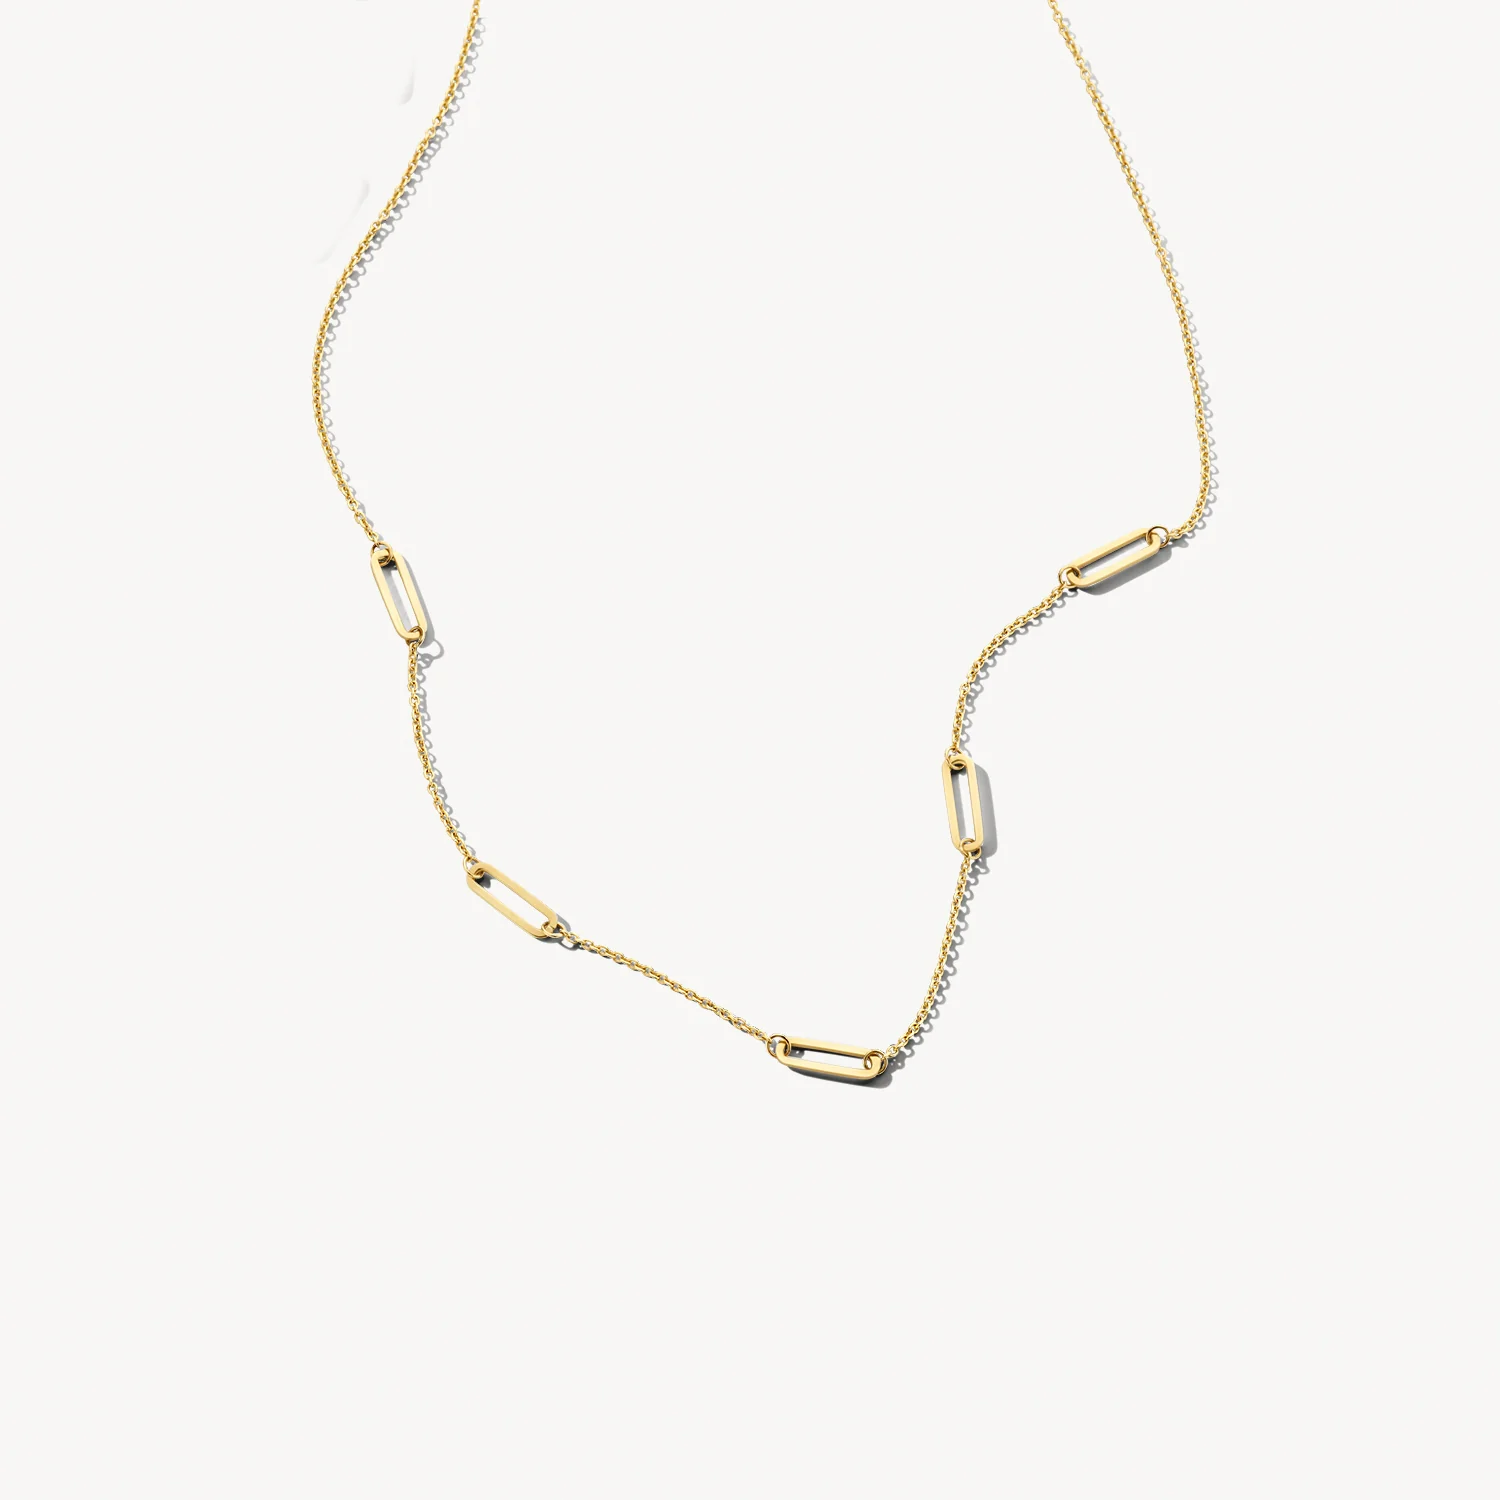 Blush Gold Chain Necklace with Open Rectangle Links